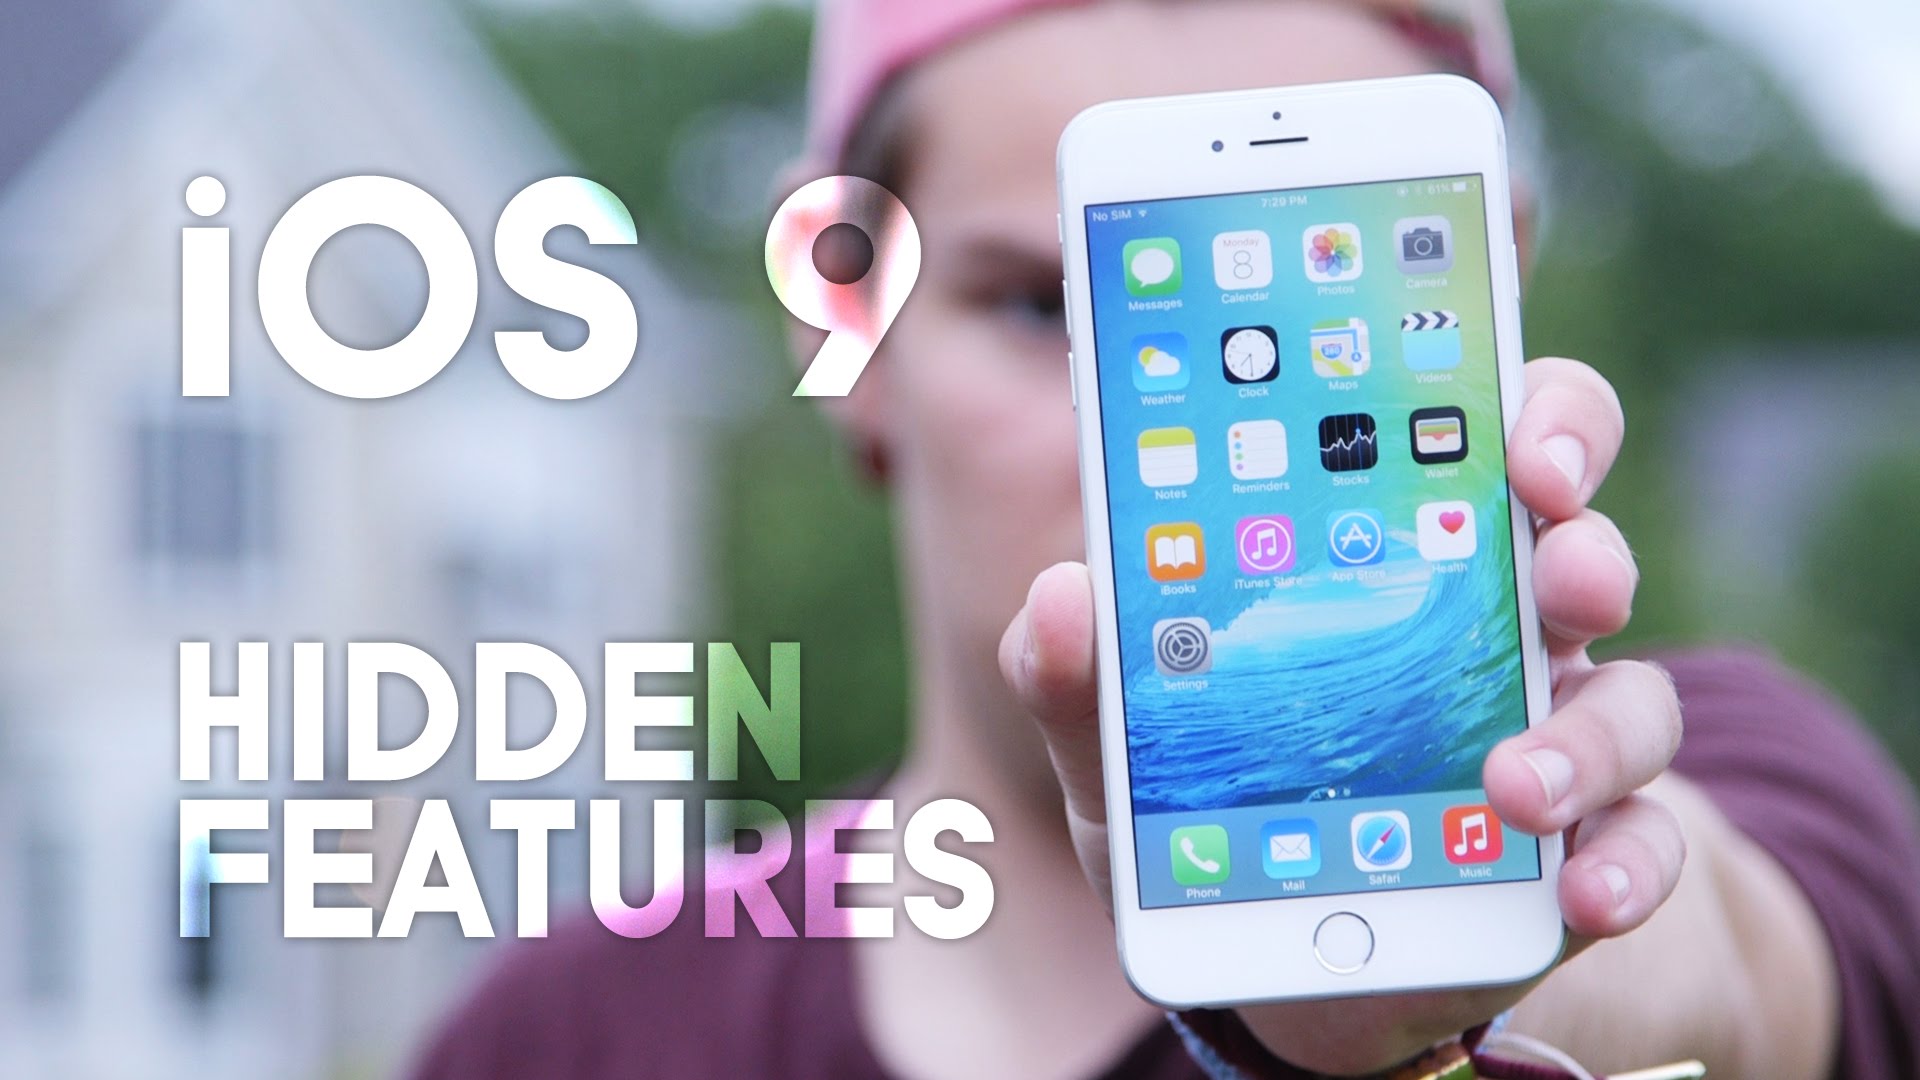 Iphone experience. IOS IPOD. Get in on IOS. Hidden features. Featured 9